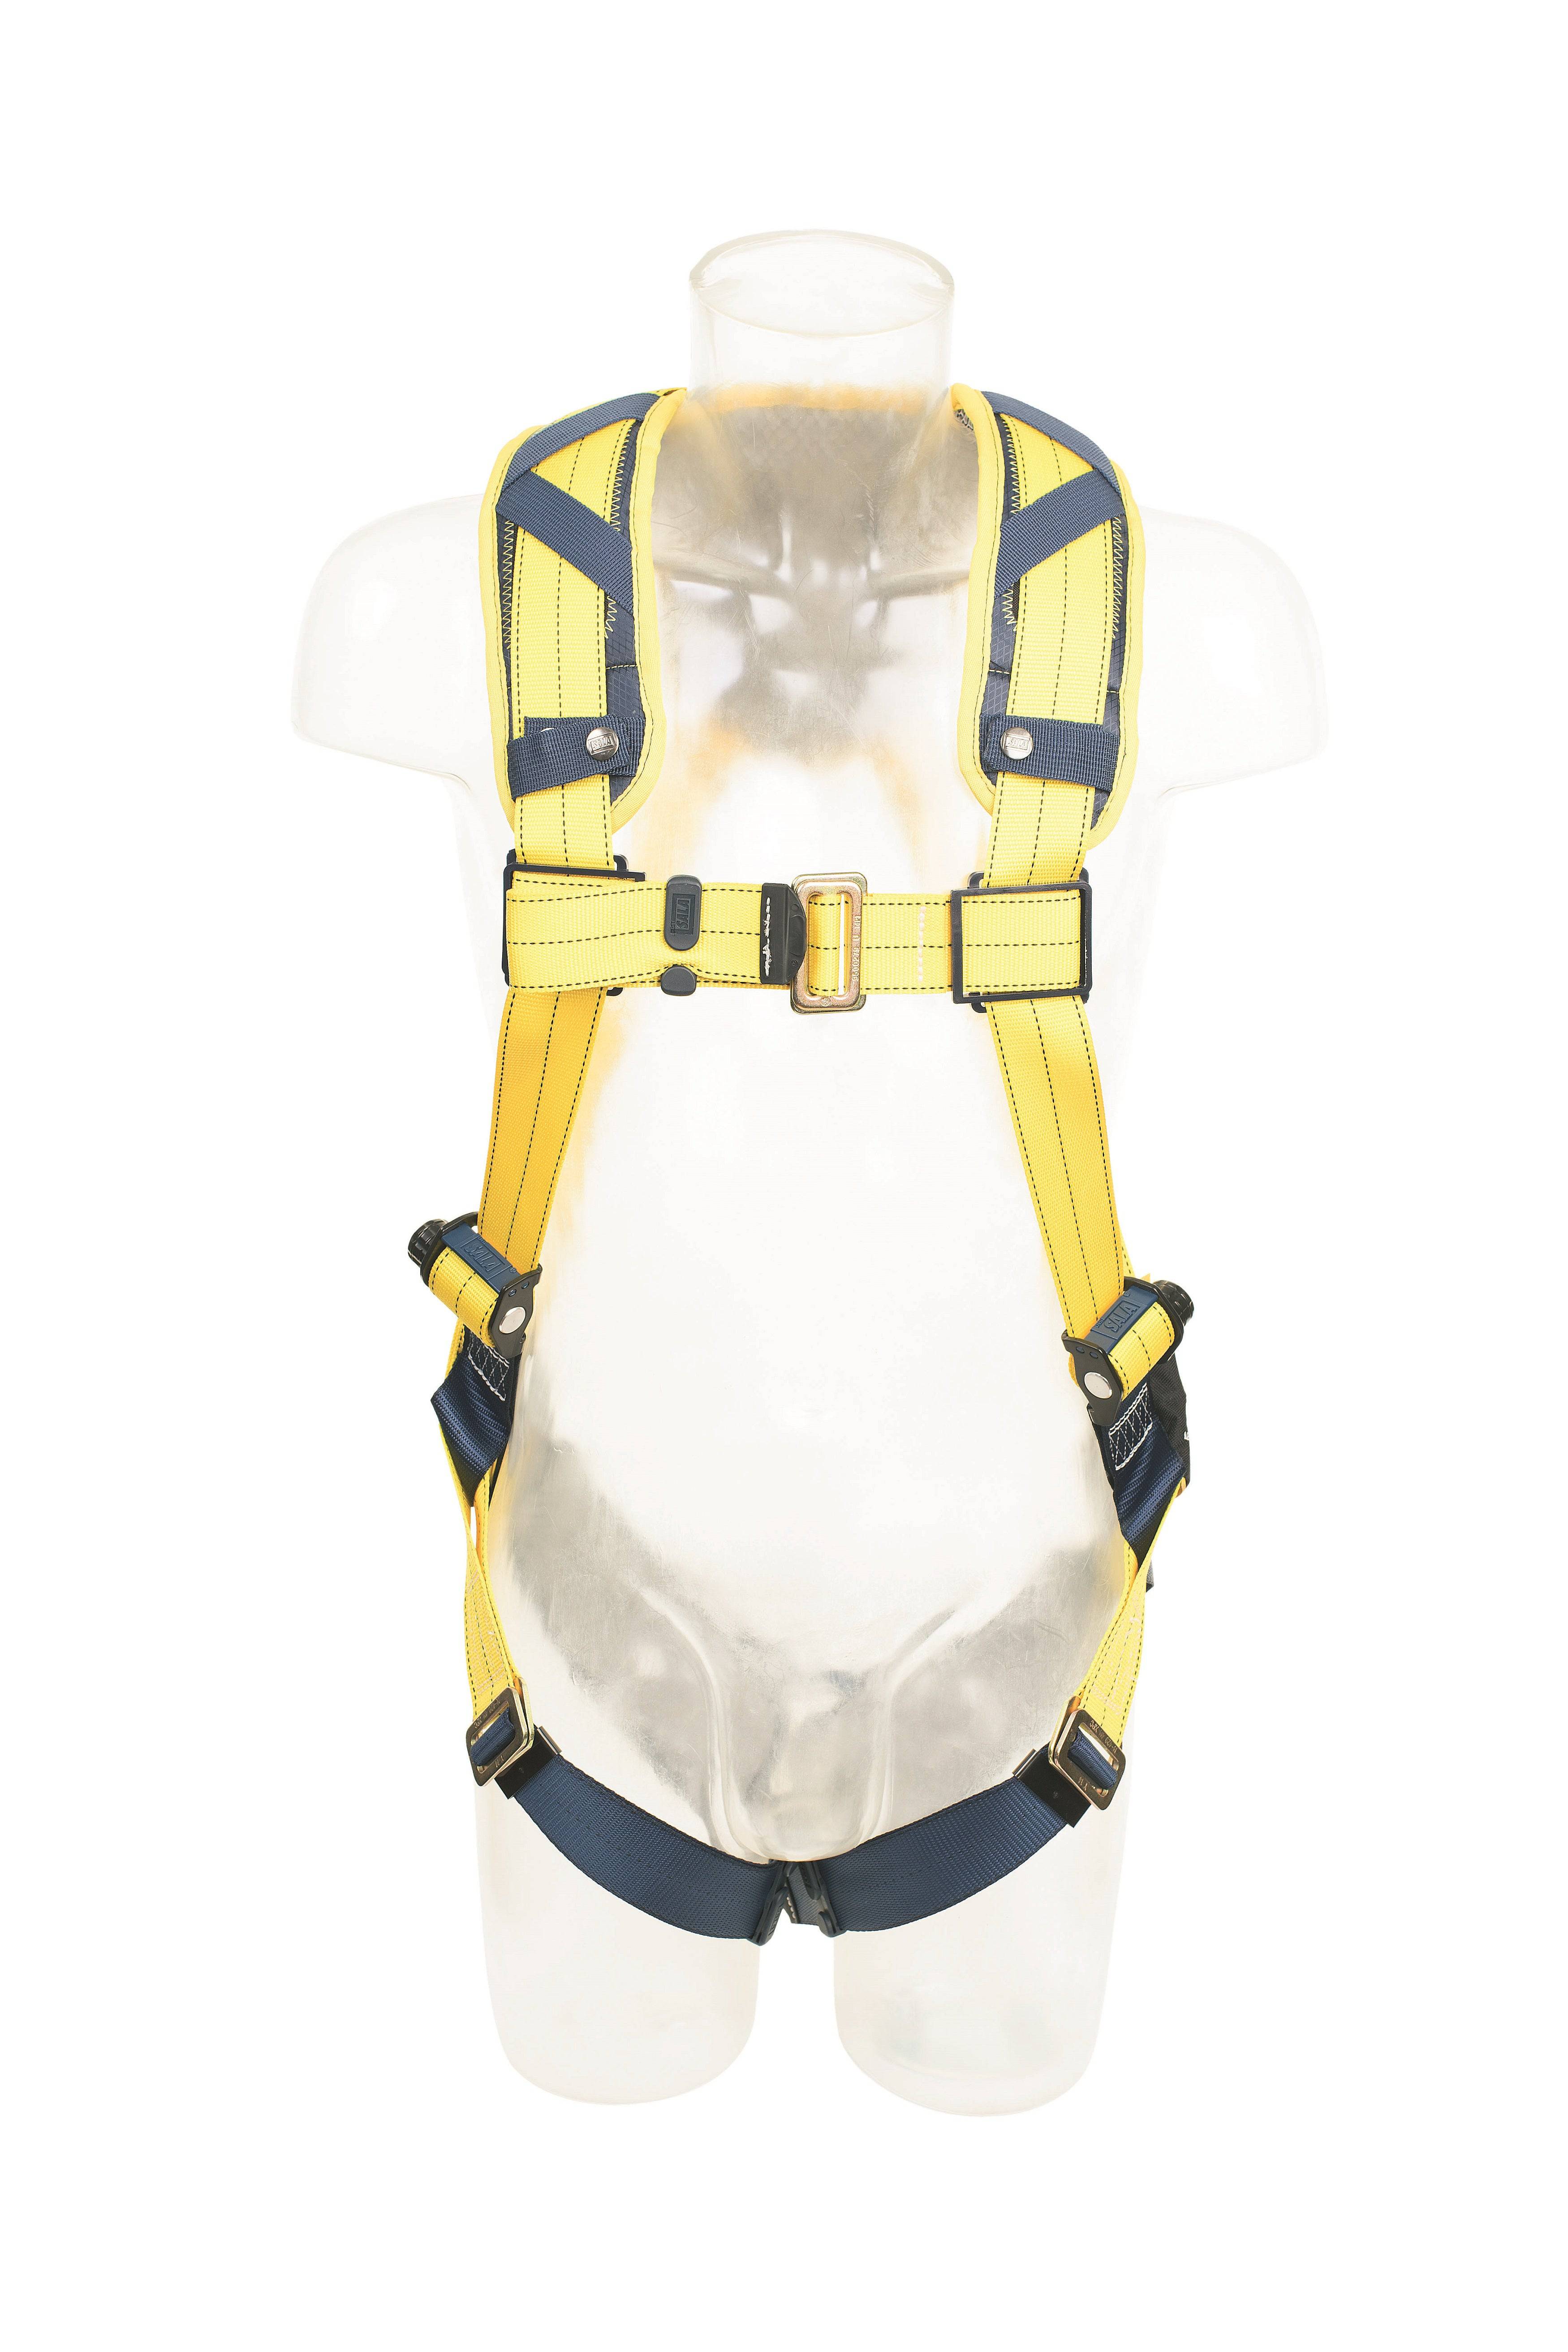 3M DBI SALA Delta Comfort Harness with Rear Attachment Point and Standard Buckles - SecureHeights